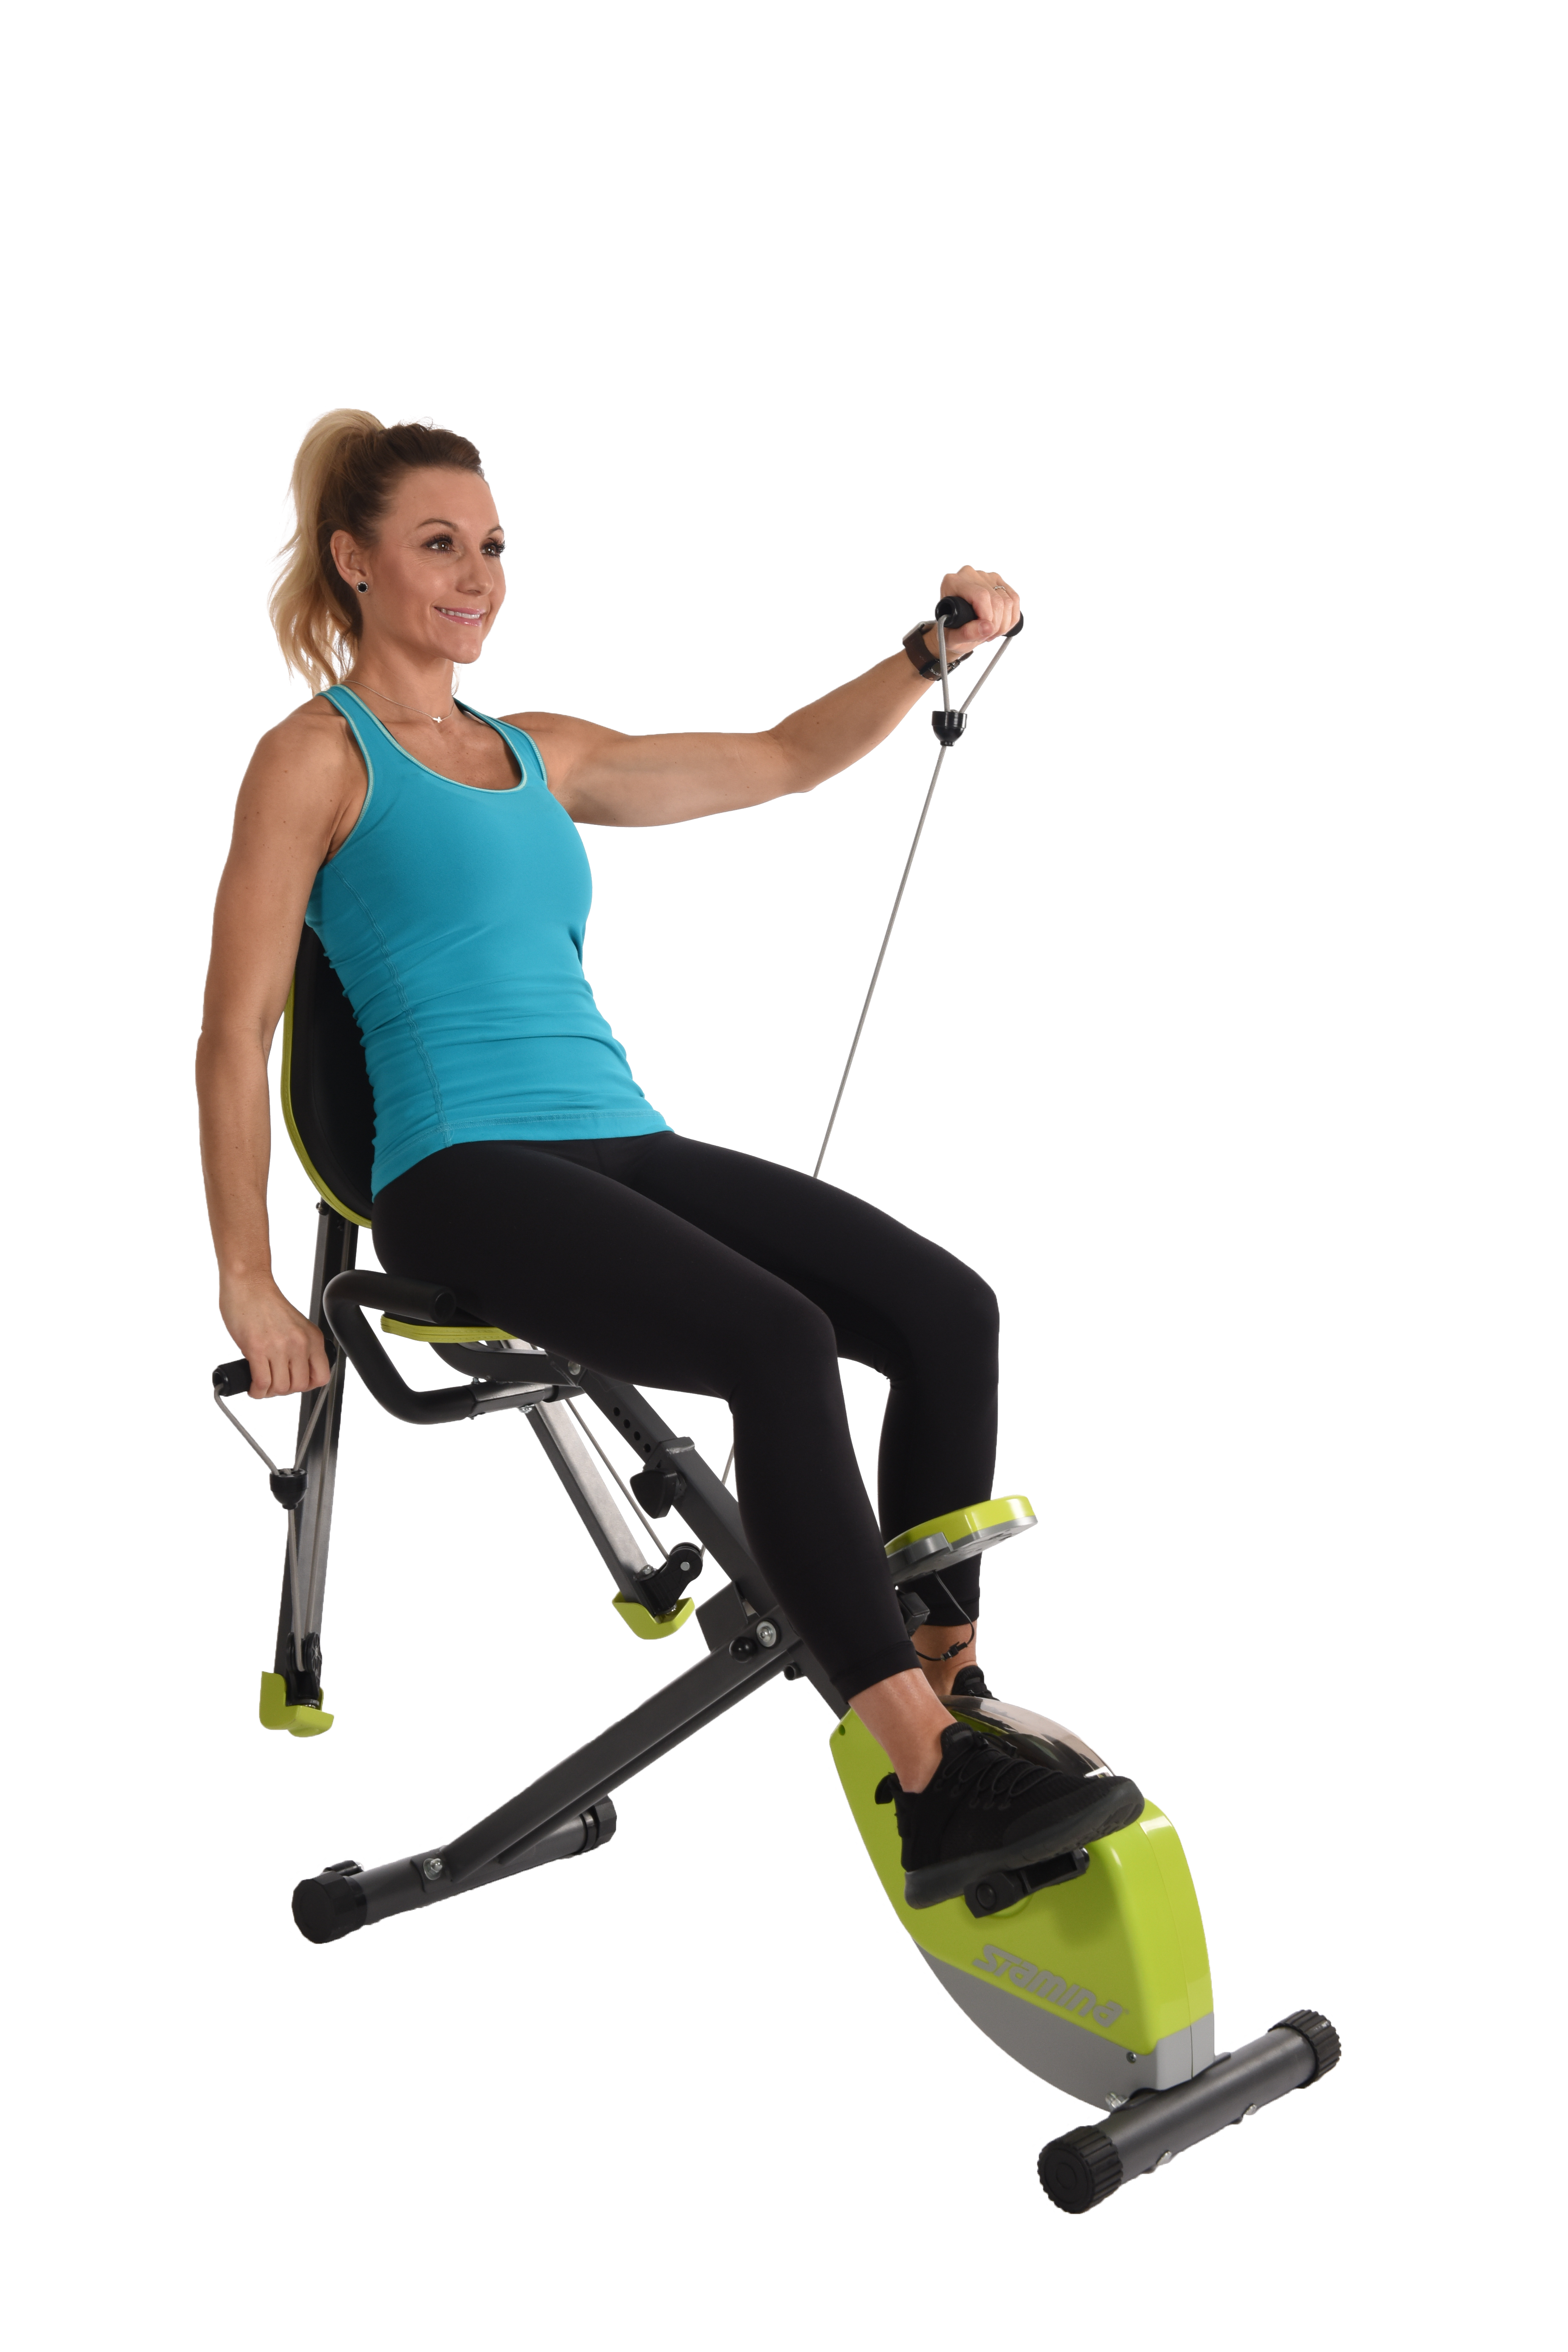 Performing seated forwad raises on Stamina Wonder Exercise Bike With Strength System.